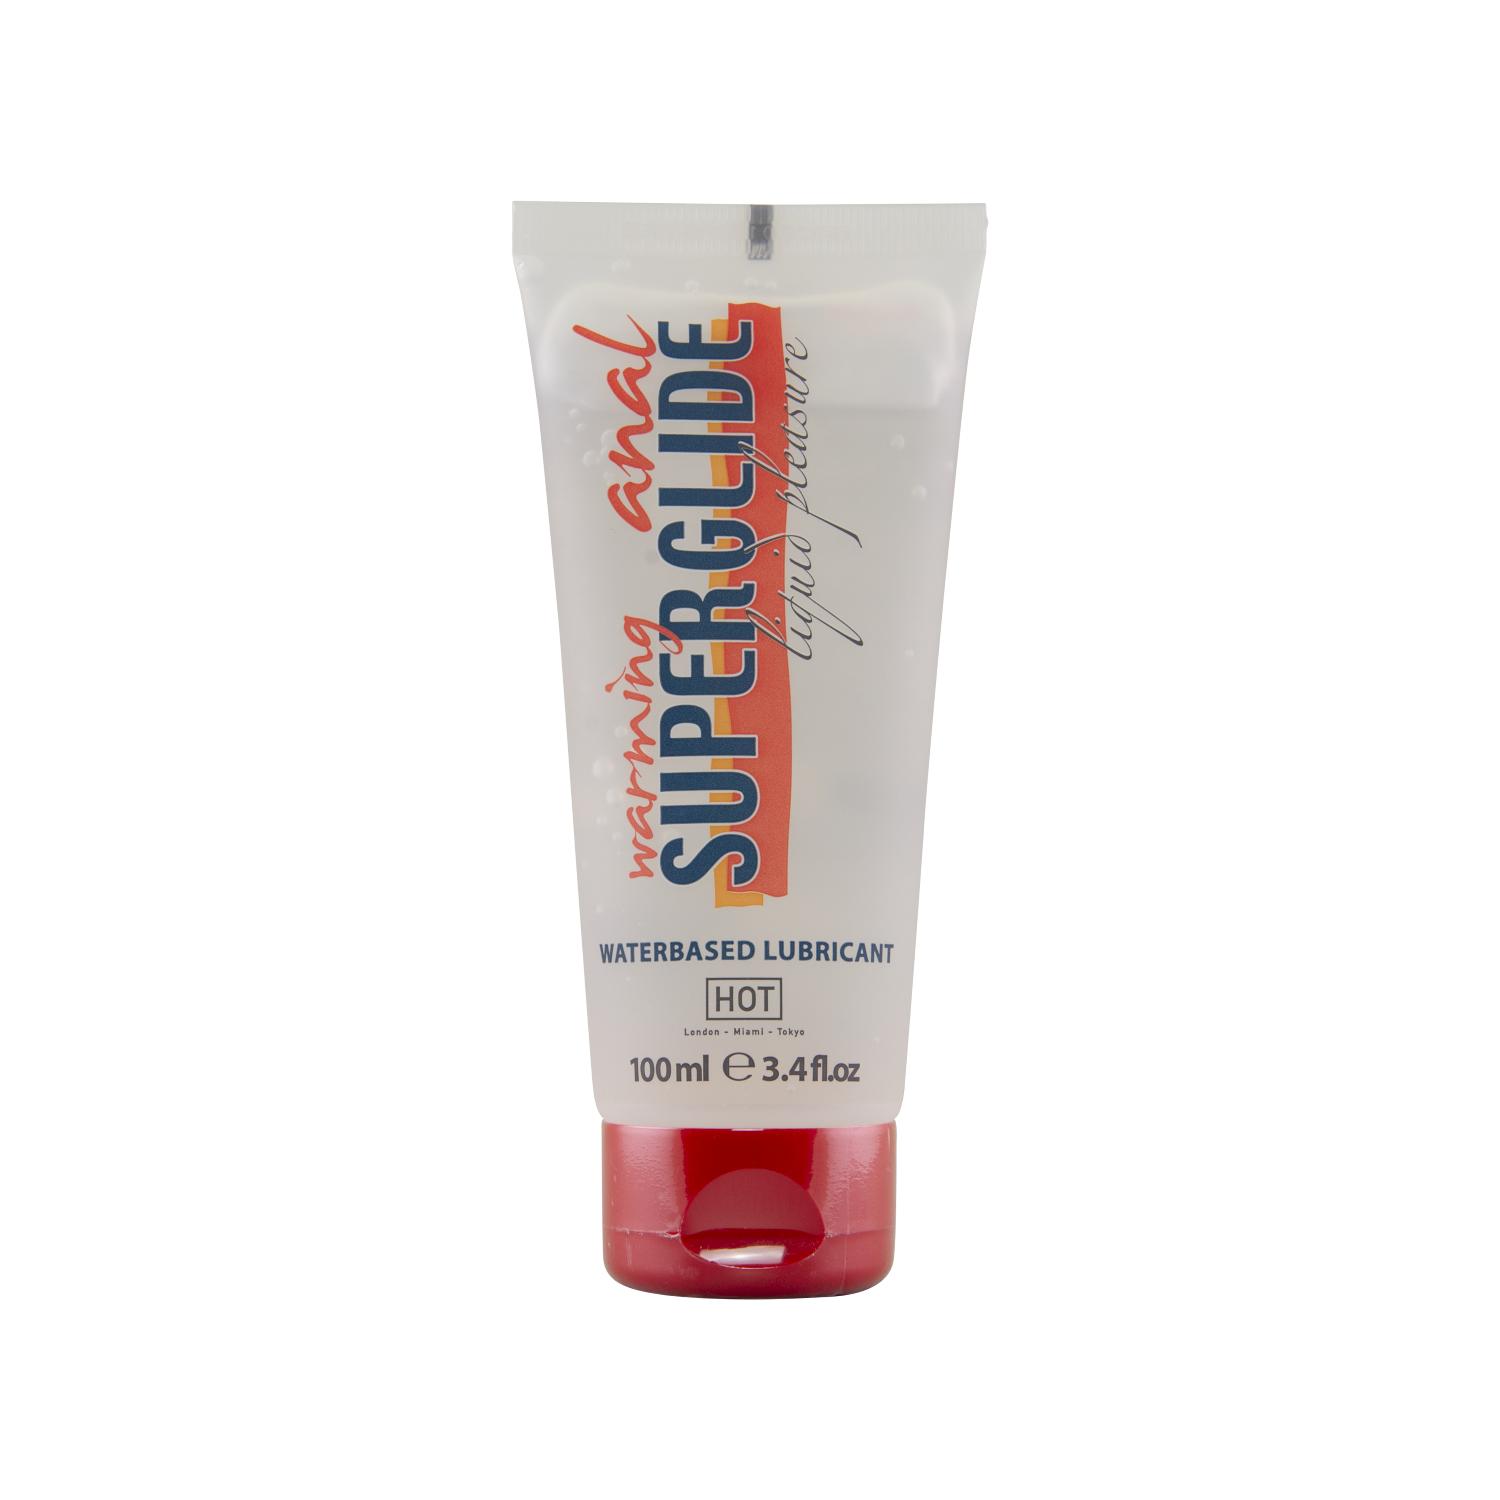 HOT WARMING ANAL SUPERGLIDE waterbased lubricant, 100ml/3.4fl.oz